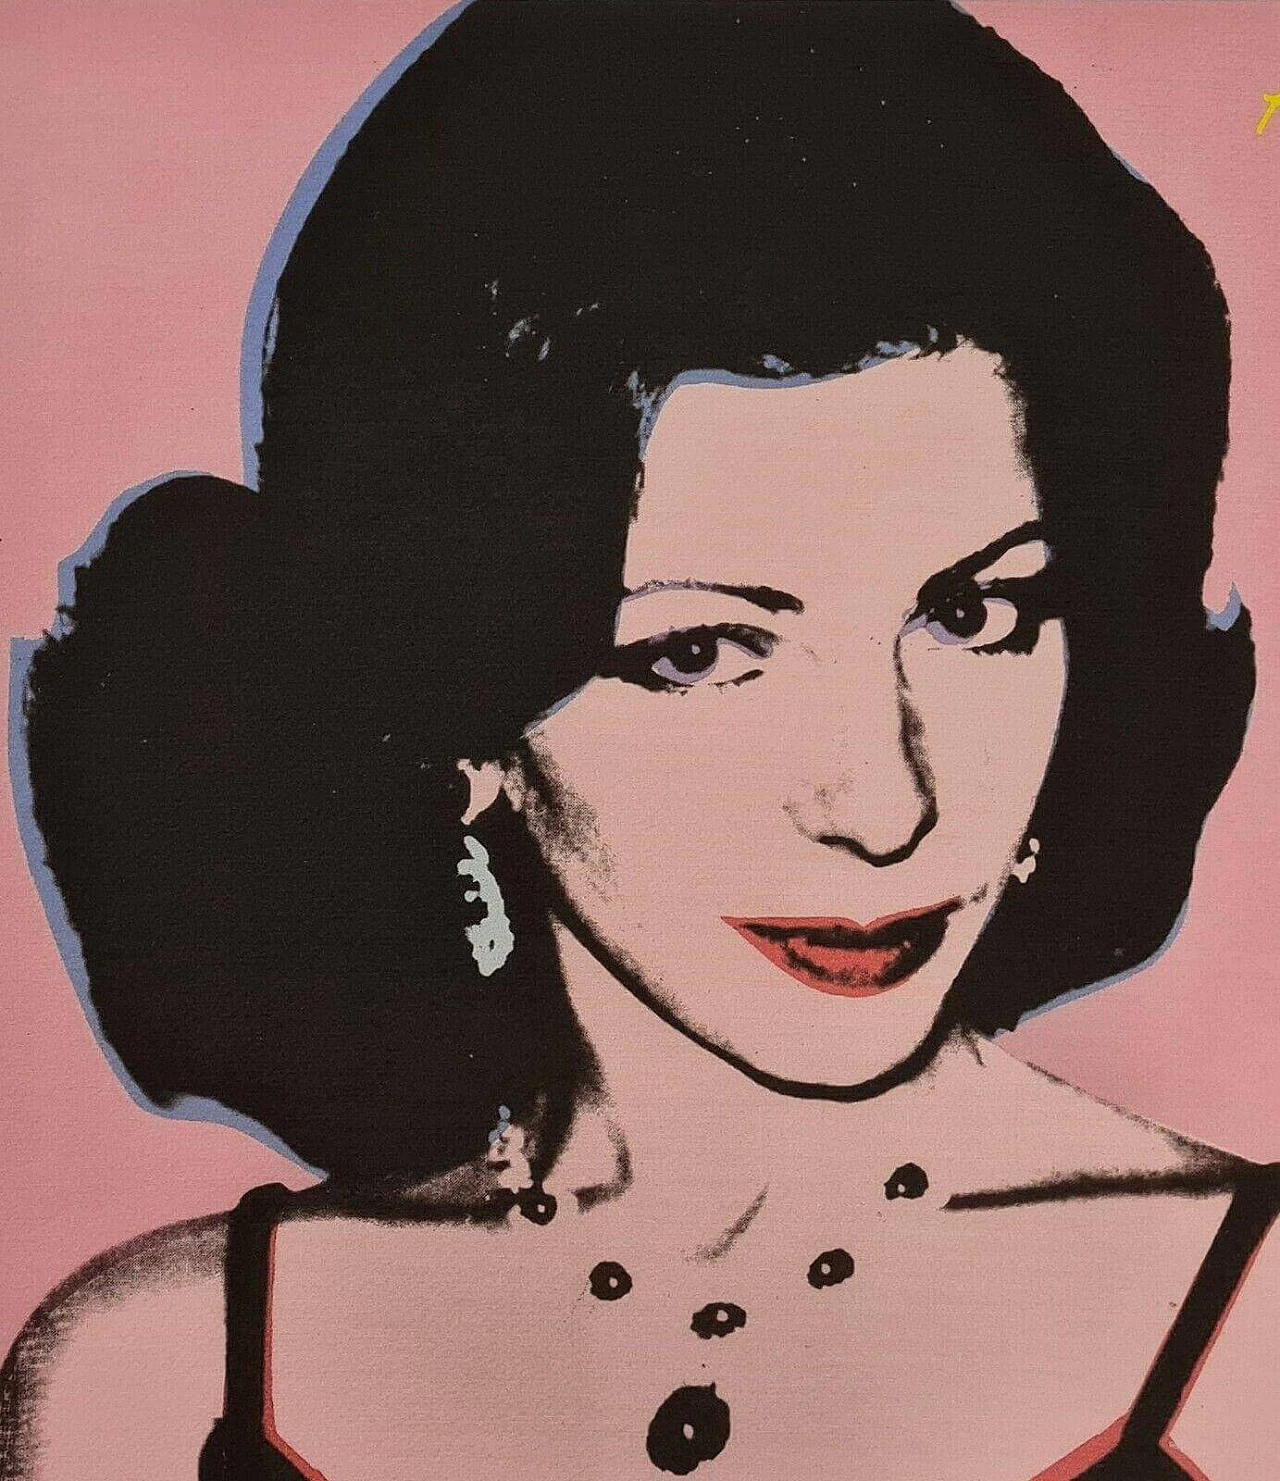 Female portrait, lithography, reproduction after Andy Warhol, 1980s 4